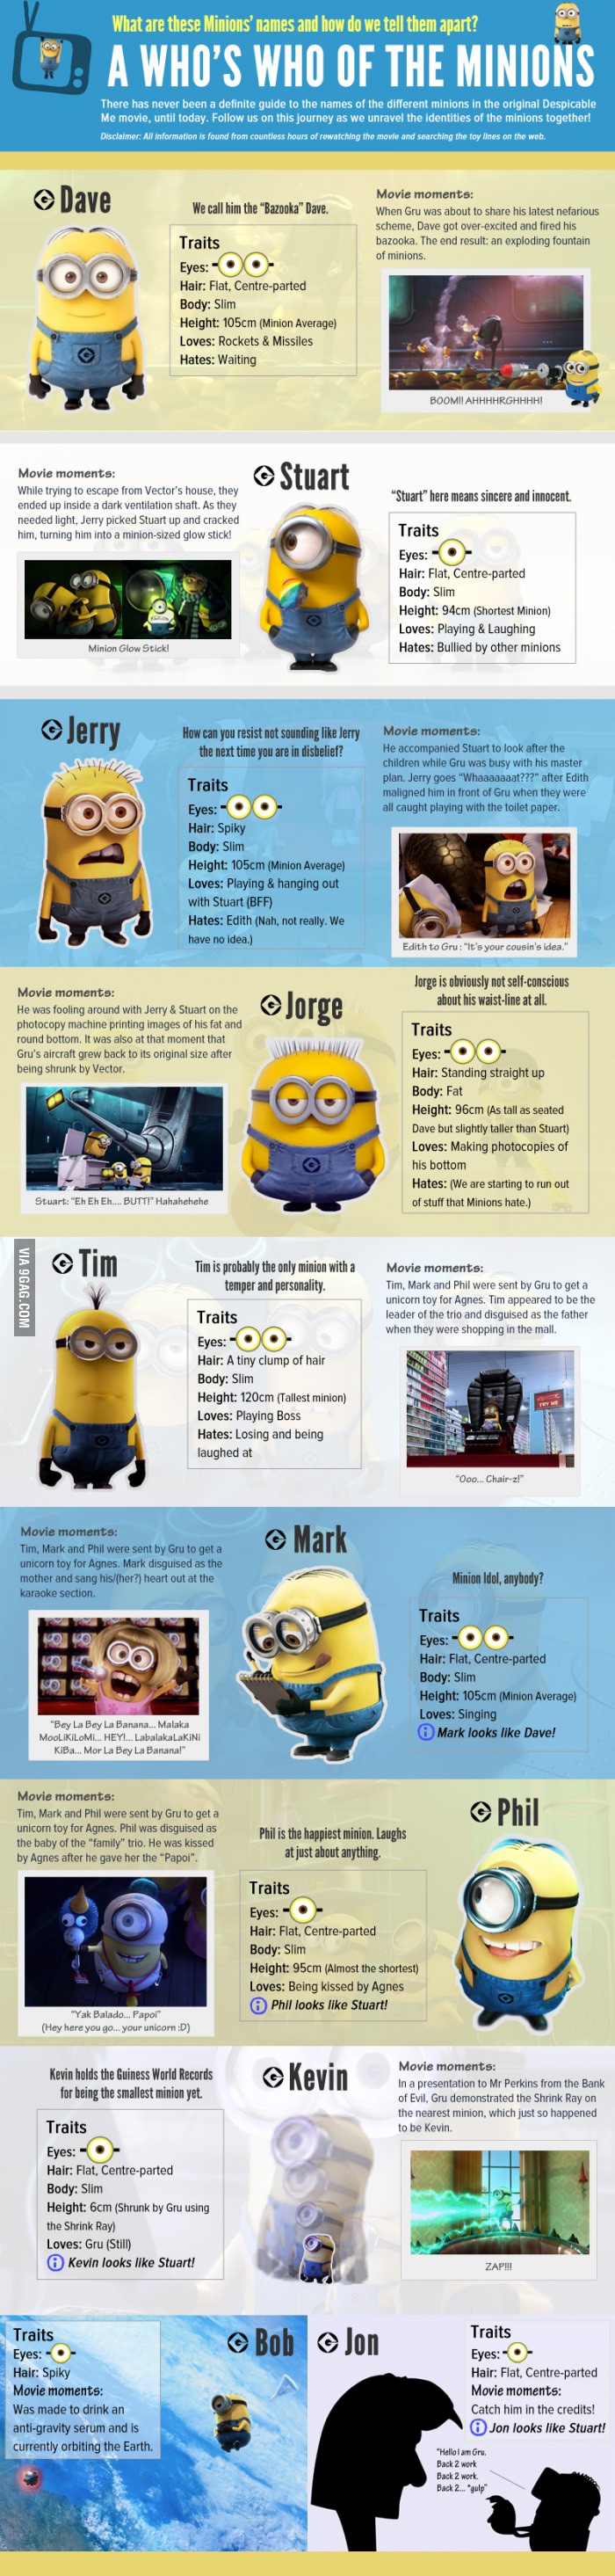 Infographic The Minions in Despicable Me